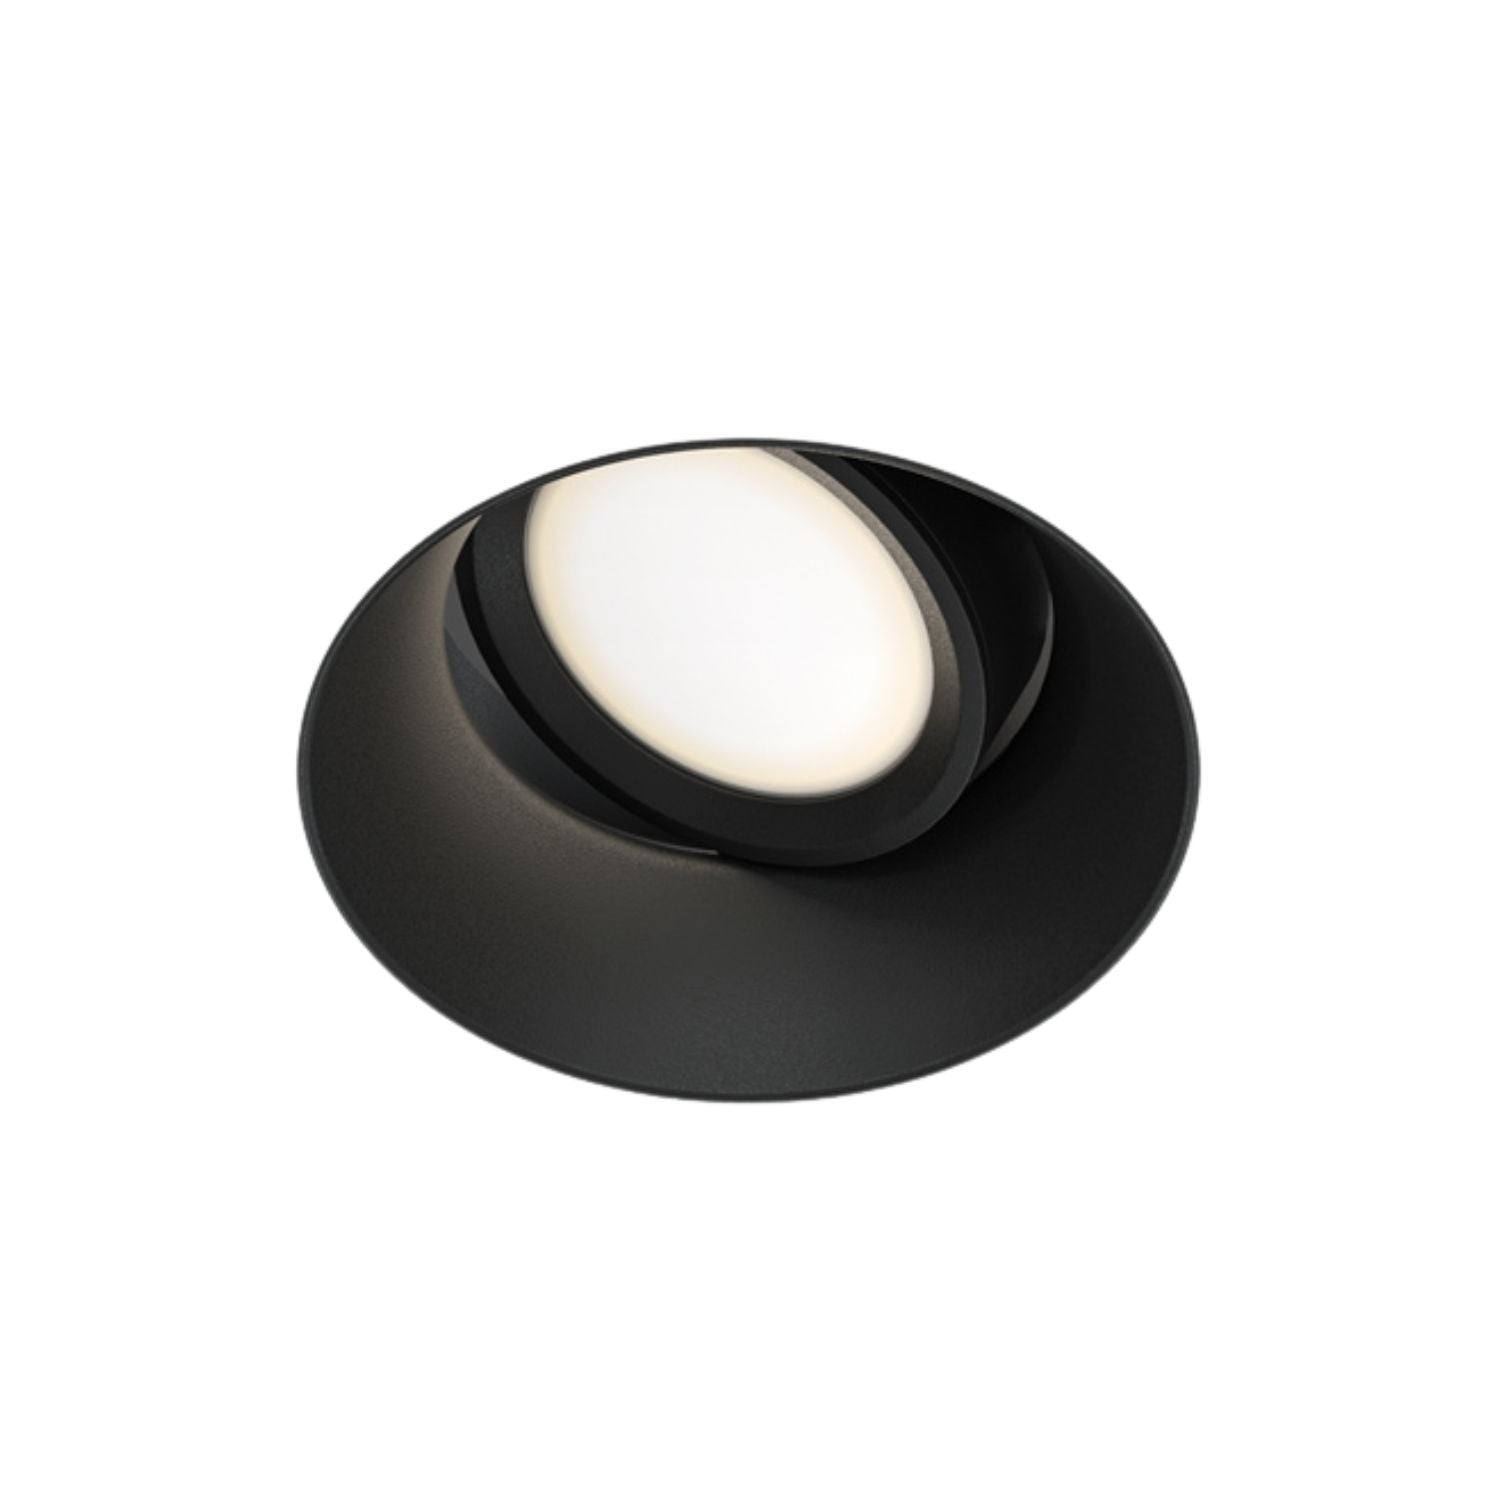 DOT - Modern round adjustable invisible recessed spotlight, 85mm